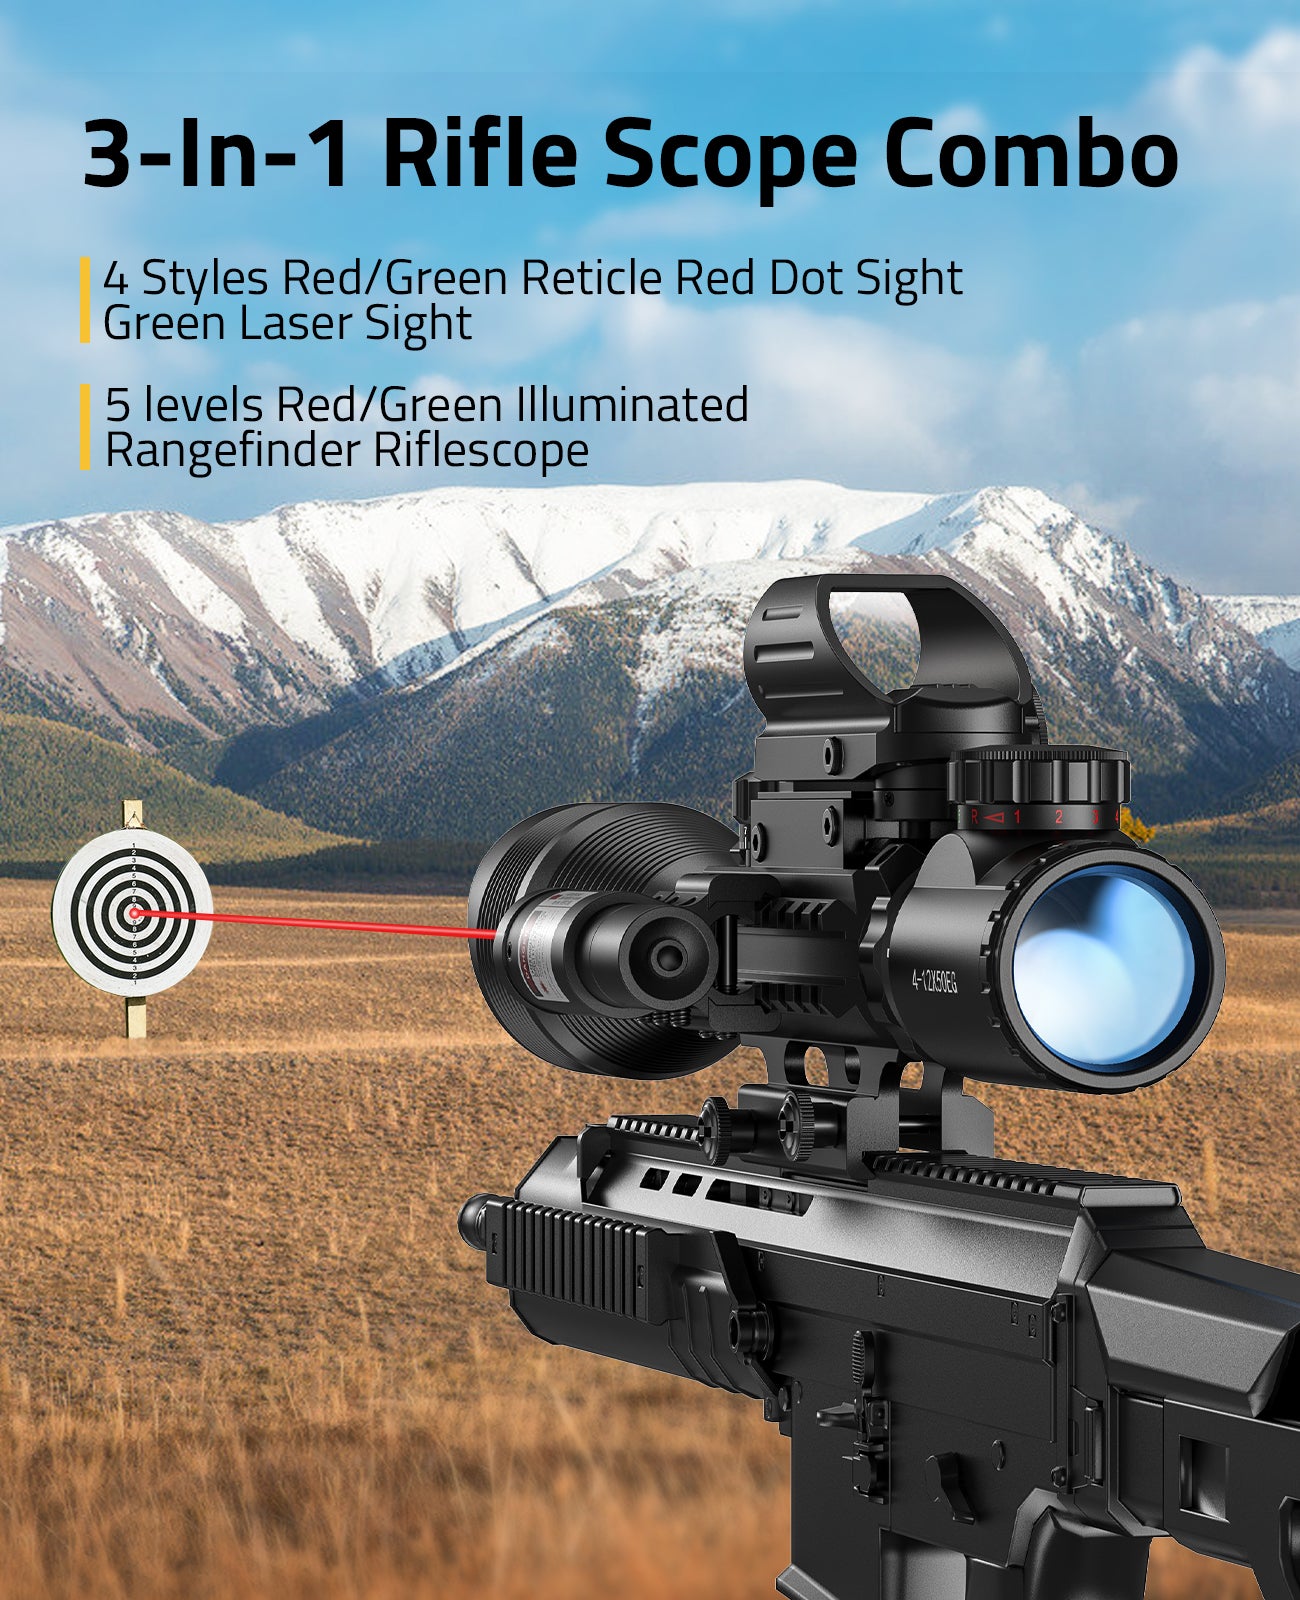 3 in1 Rifle Scope Combo with Red Dot Sight, Green Laser Sight and Red/Green Illuminated Scope